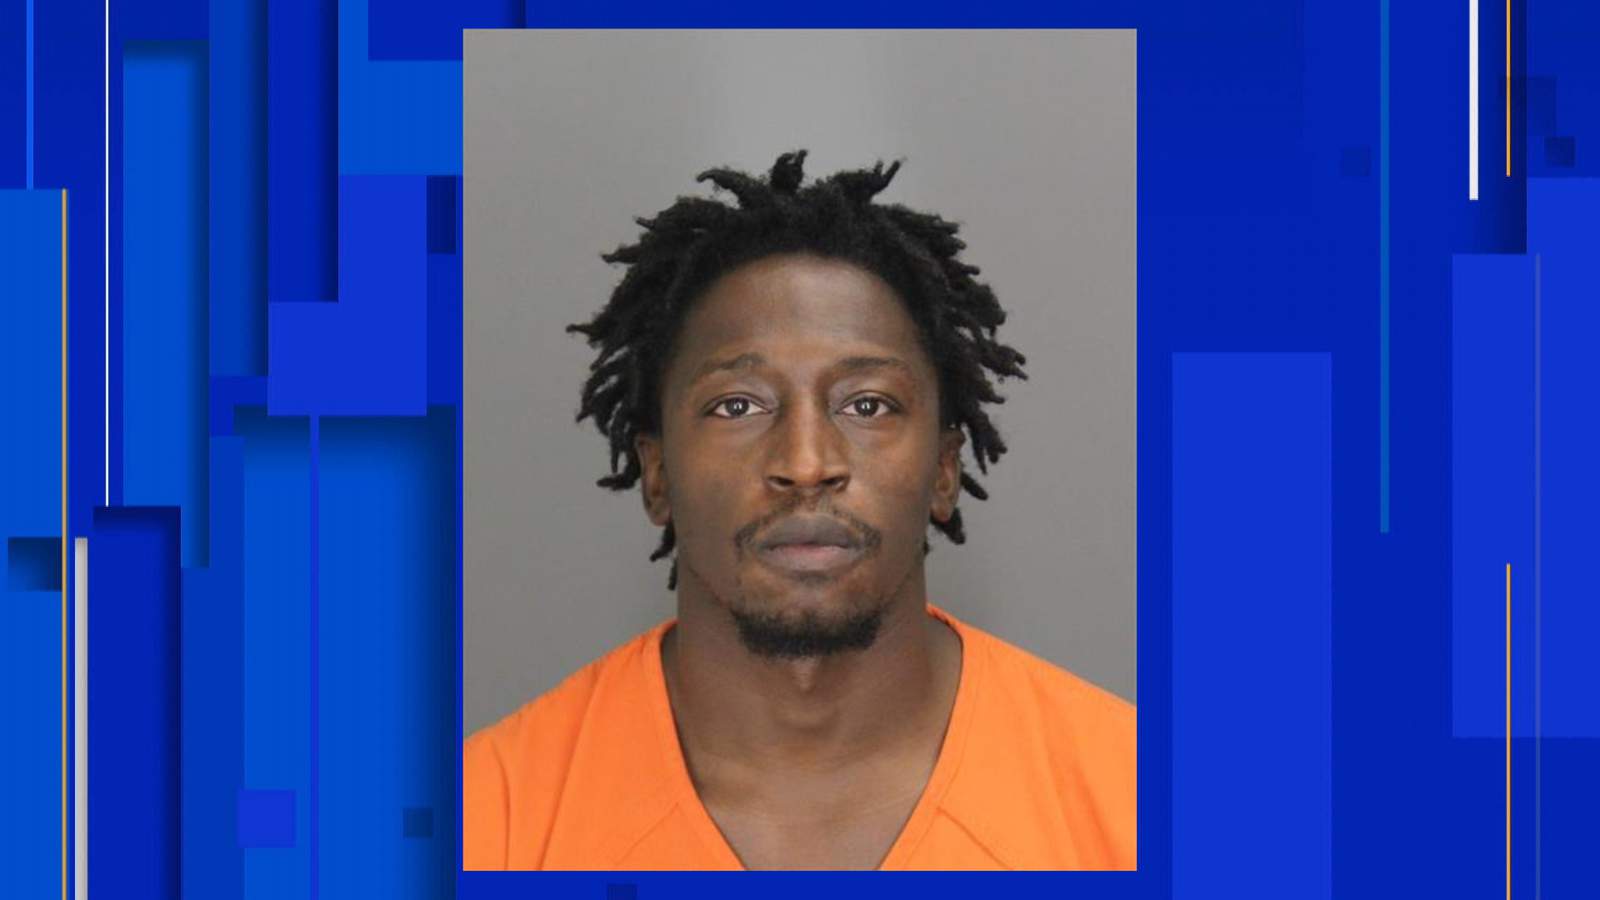 Pontiac man faces 10 felony charges in apartment shooting that killed 3 men, injured 1